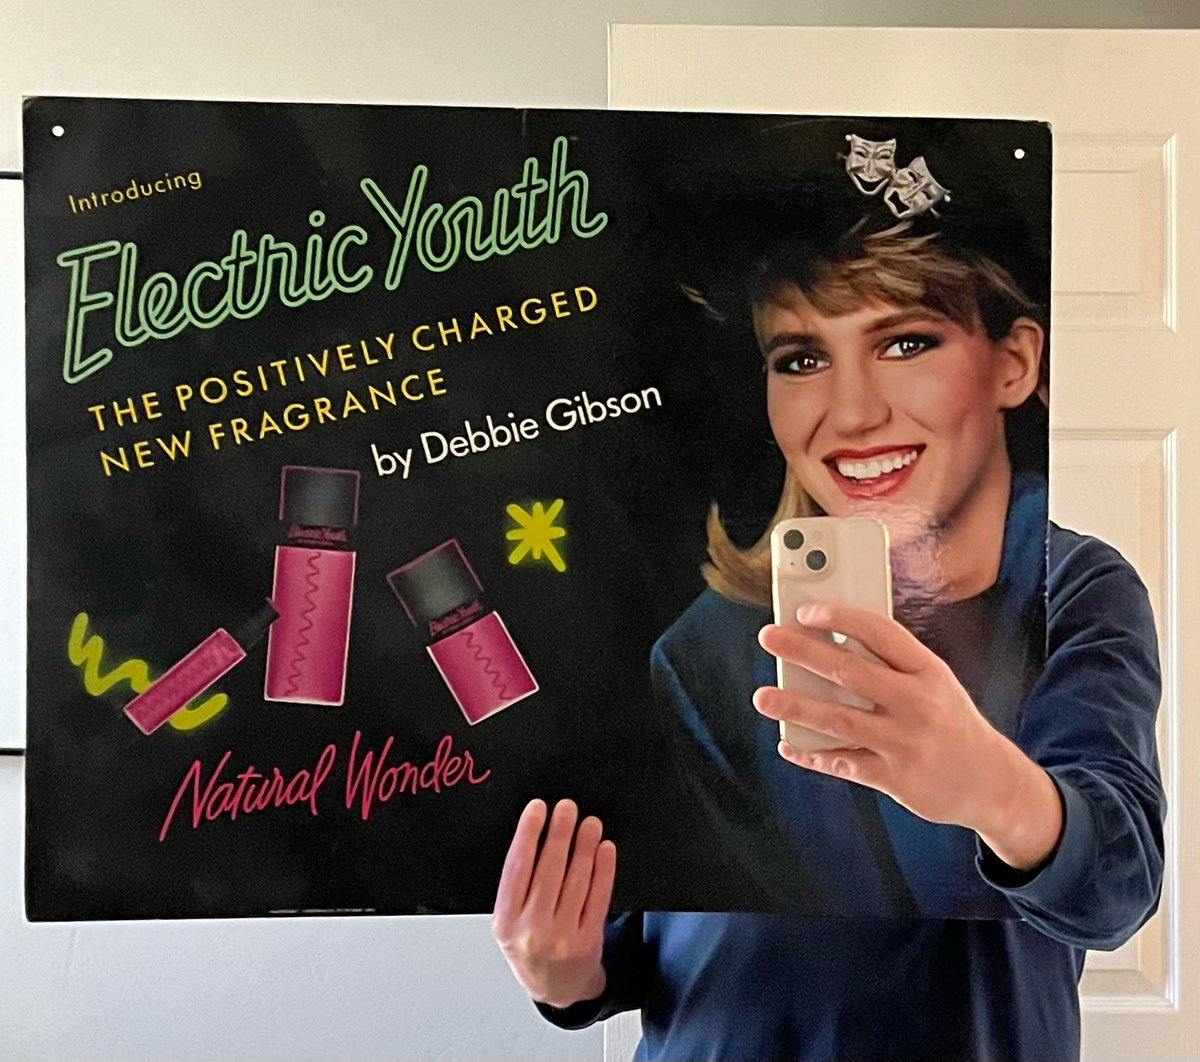 Advertising selfie from the 80s? 🤪

#debbiegibson #deborahgibson #electricyouthperfume #ey34 #electricyouth #andthefutureiselectricyouth #todayinpopmusic